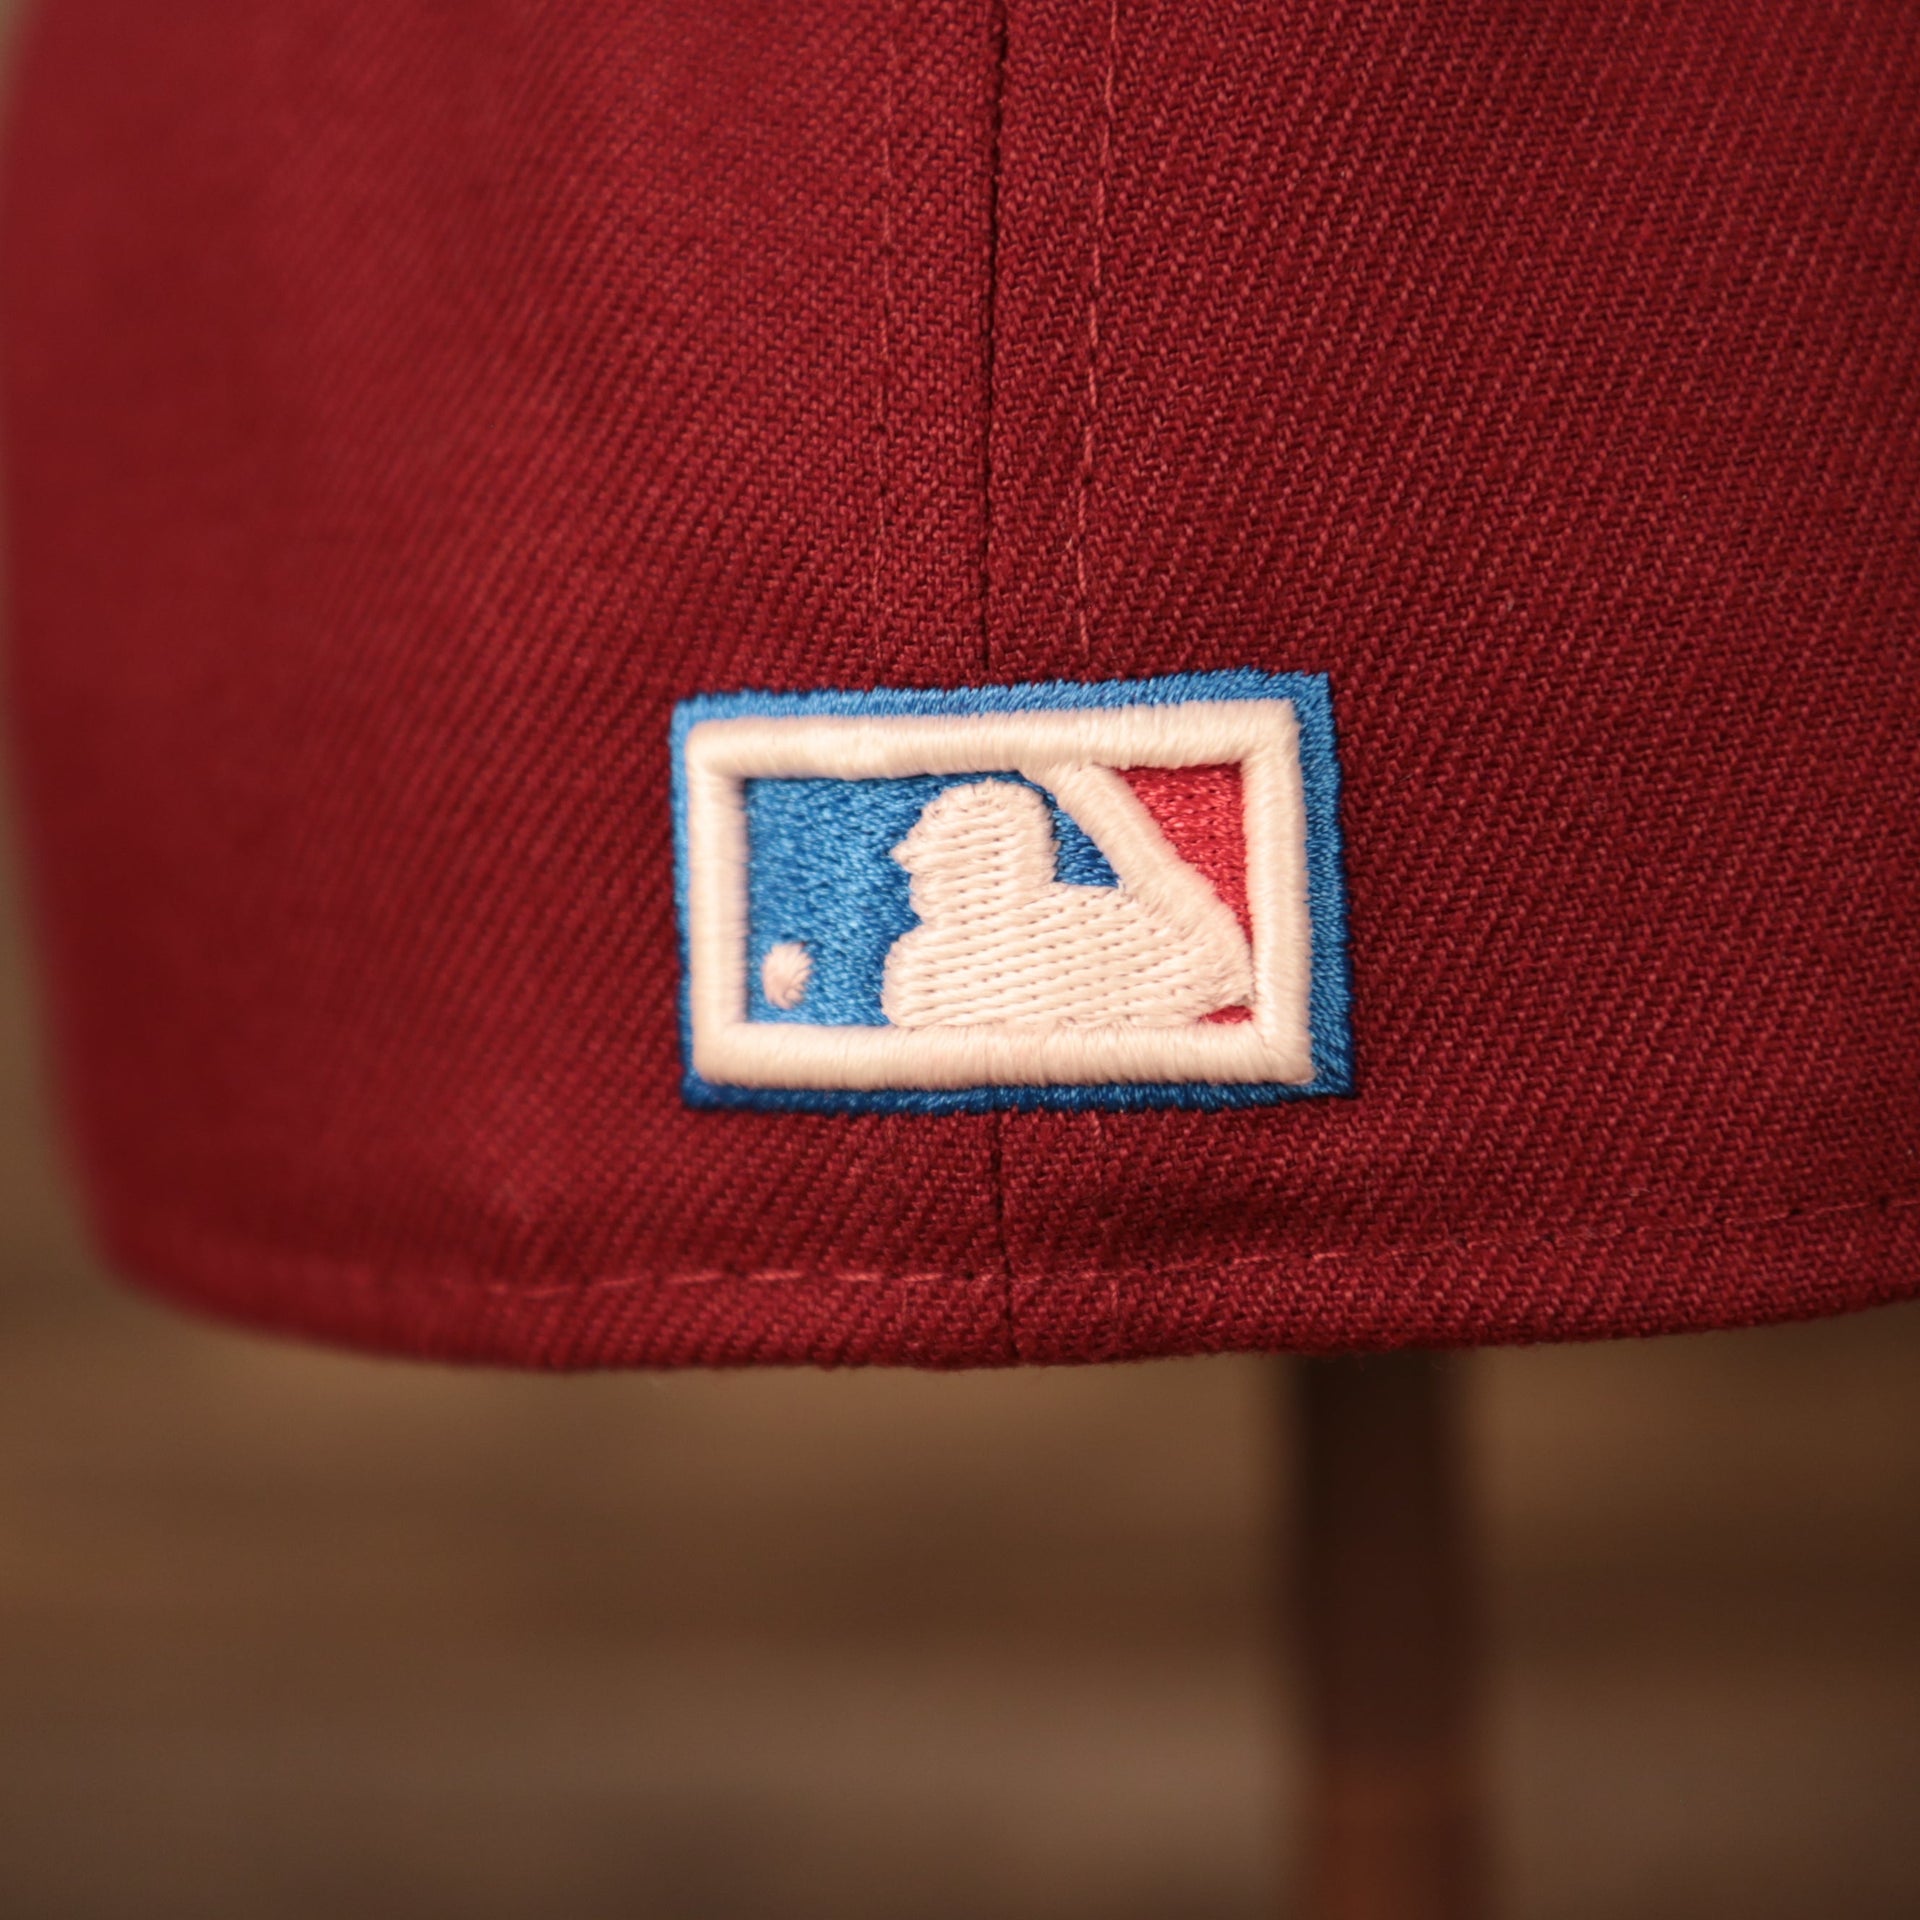 The MLB logo patch on the backside of the Phillies glow in the dark floral underbrim 5950 New Era hat.